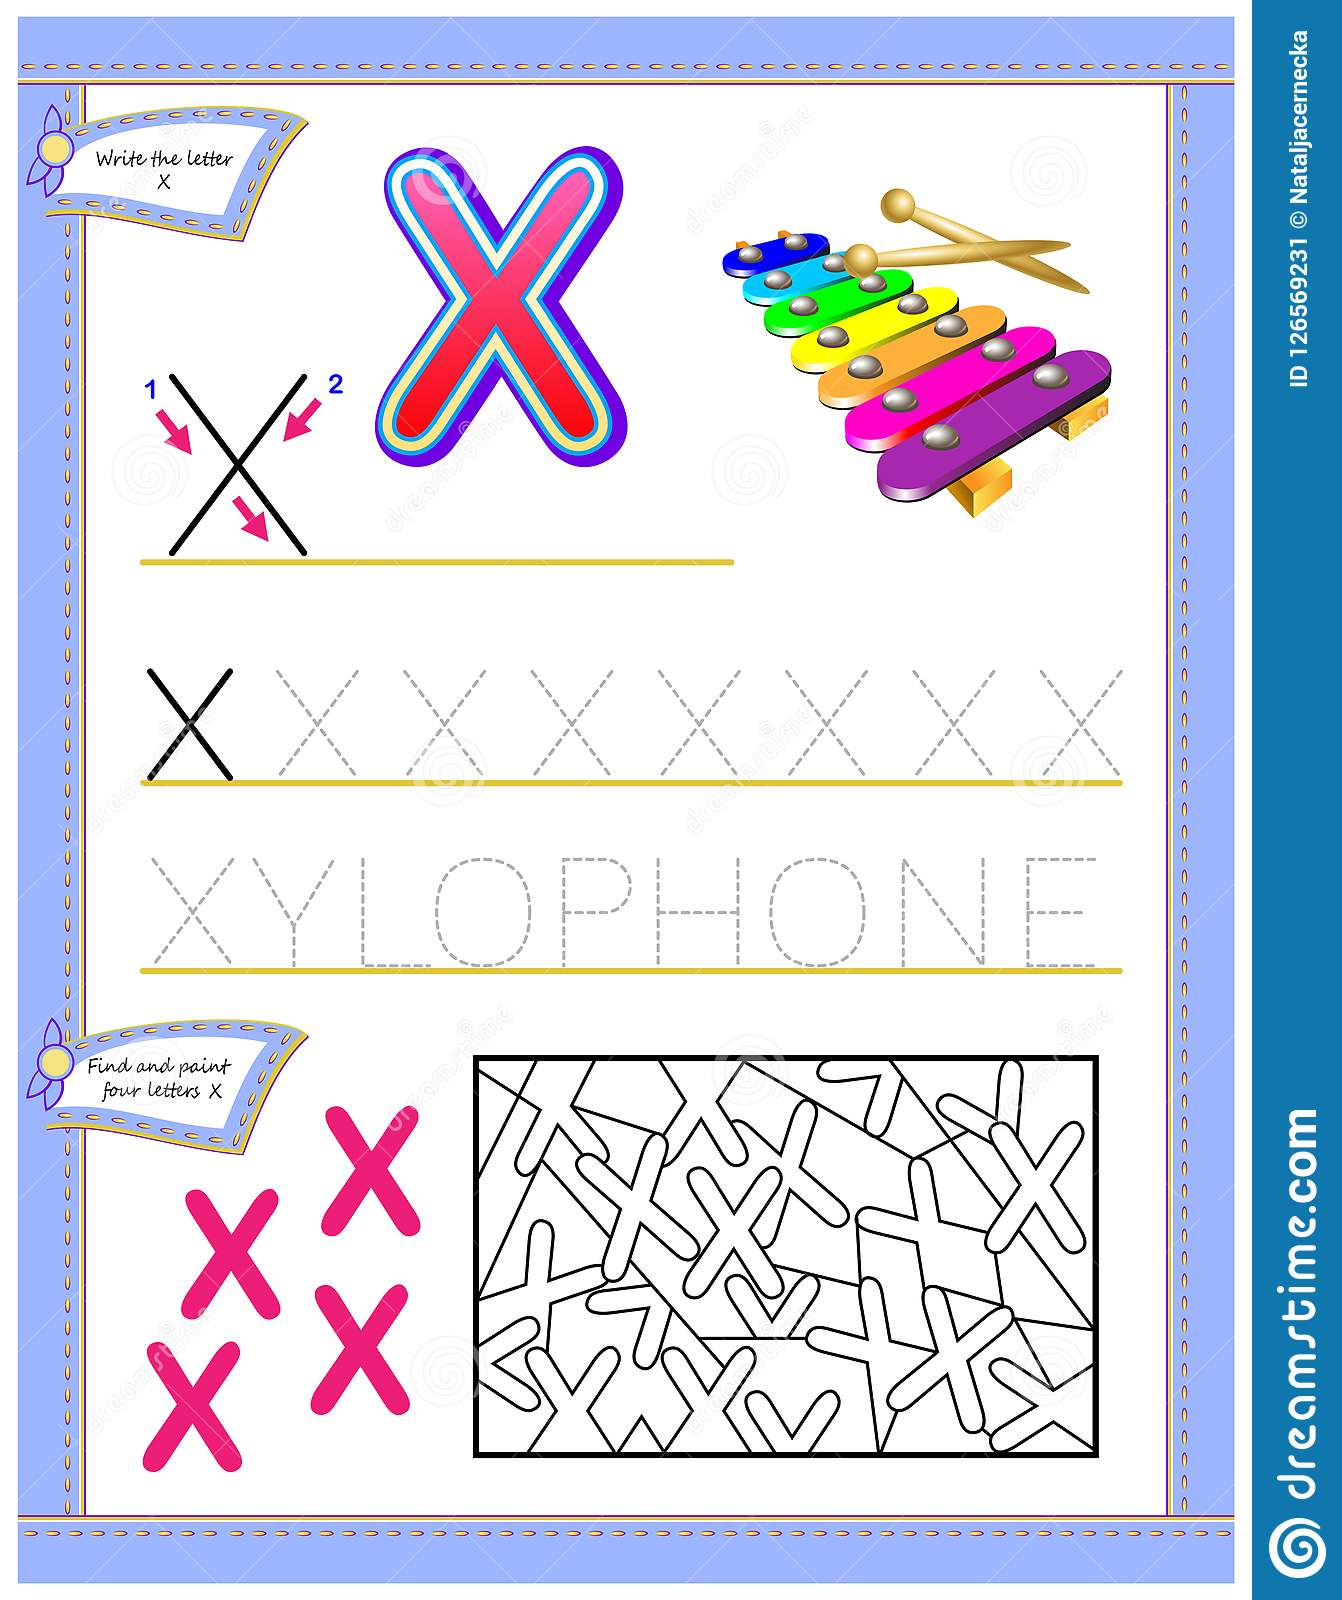 Worksheet For Kids With Letter X For Study English Alphabet. Logic - X Puzzle Worksheet